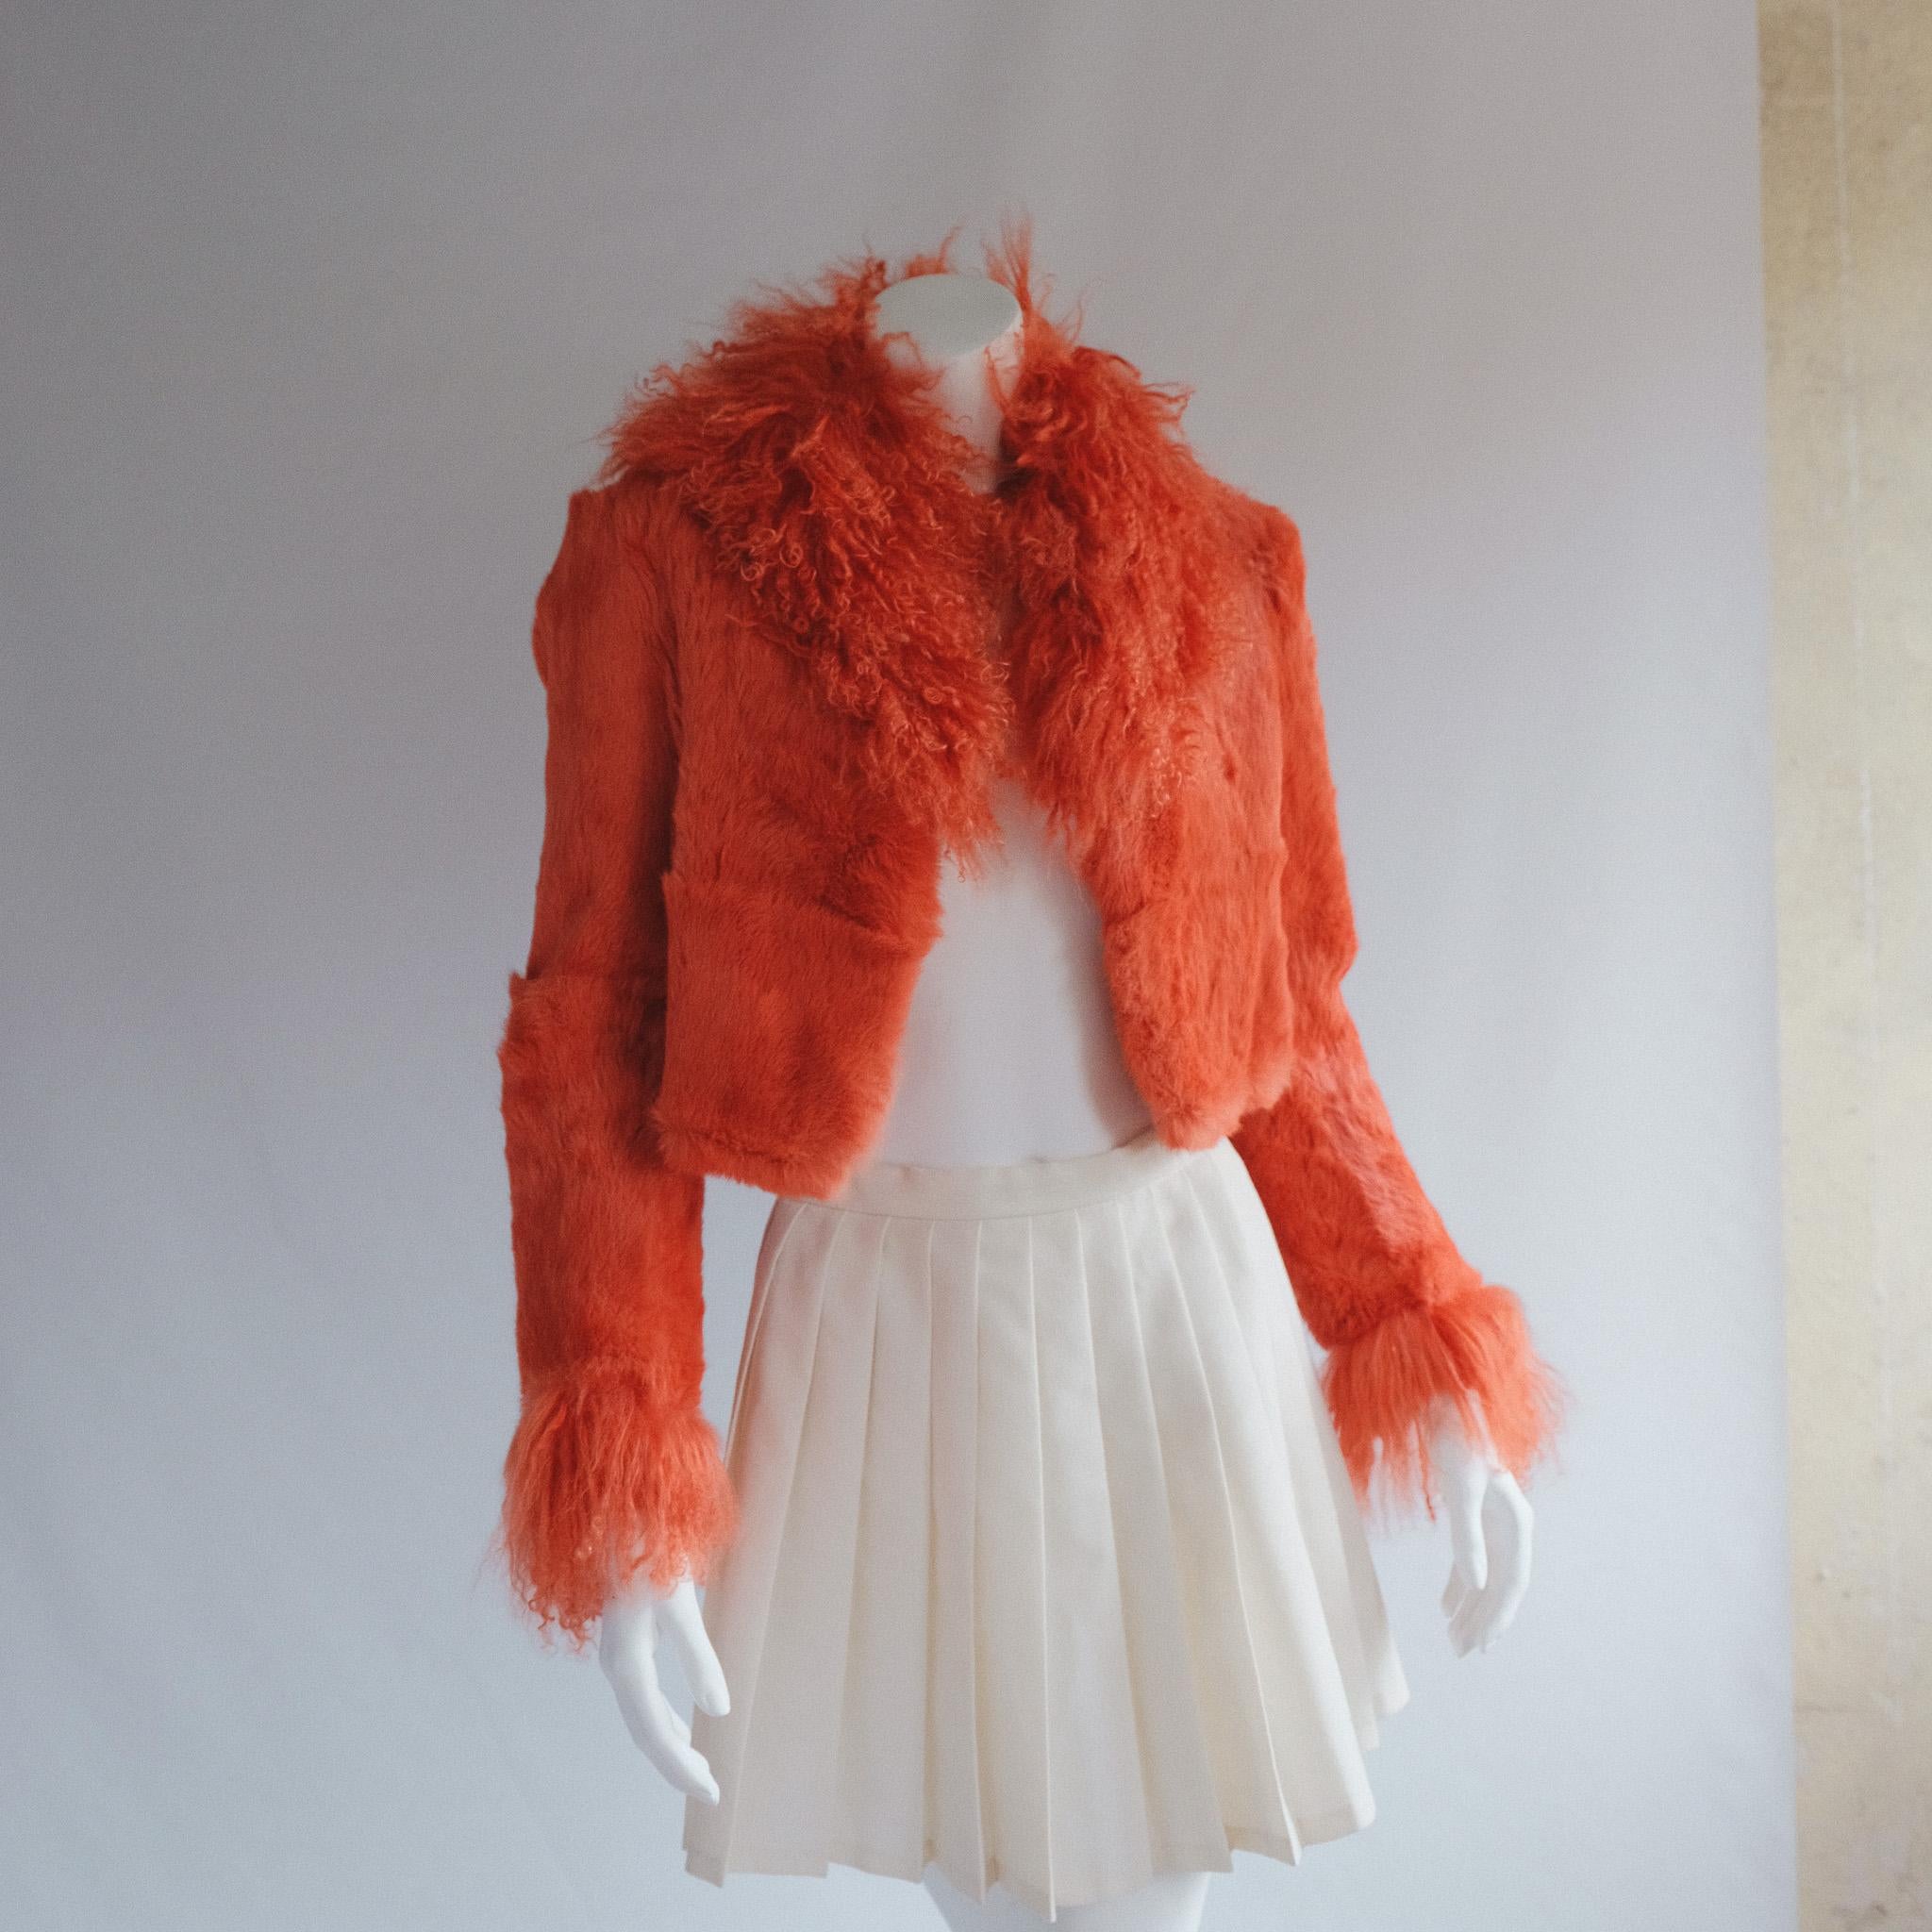 Orange rabit fur coat with Mongolian long goat fur penny lane detail.
Fully lined.
So soft and so warm
TRULY ICONIC

Tag size nil
Our fit estimate: depending on desired fit 6-8
Pictured on size 6 5’5
Excellent vintage condition, light wear to be